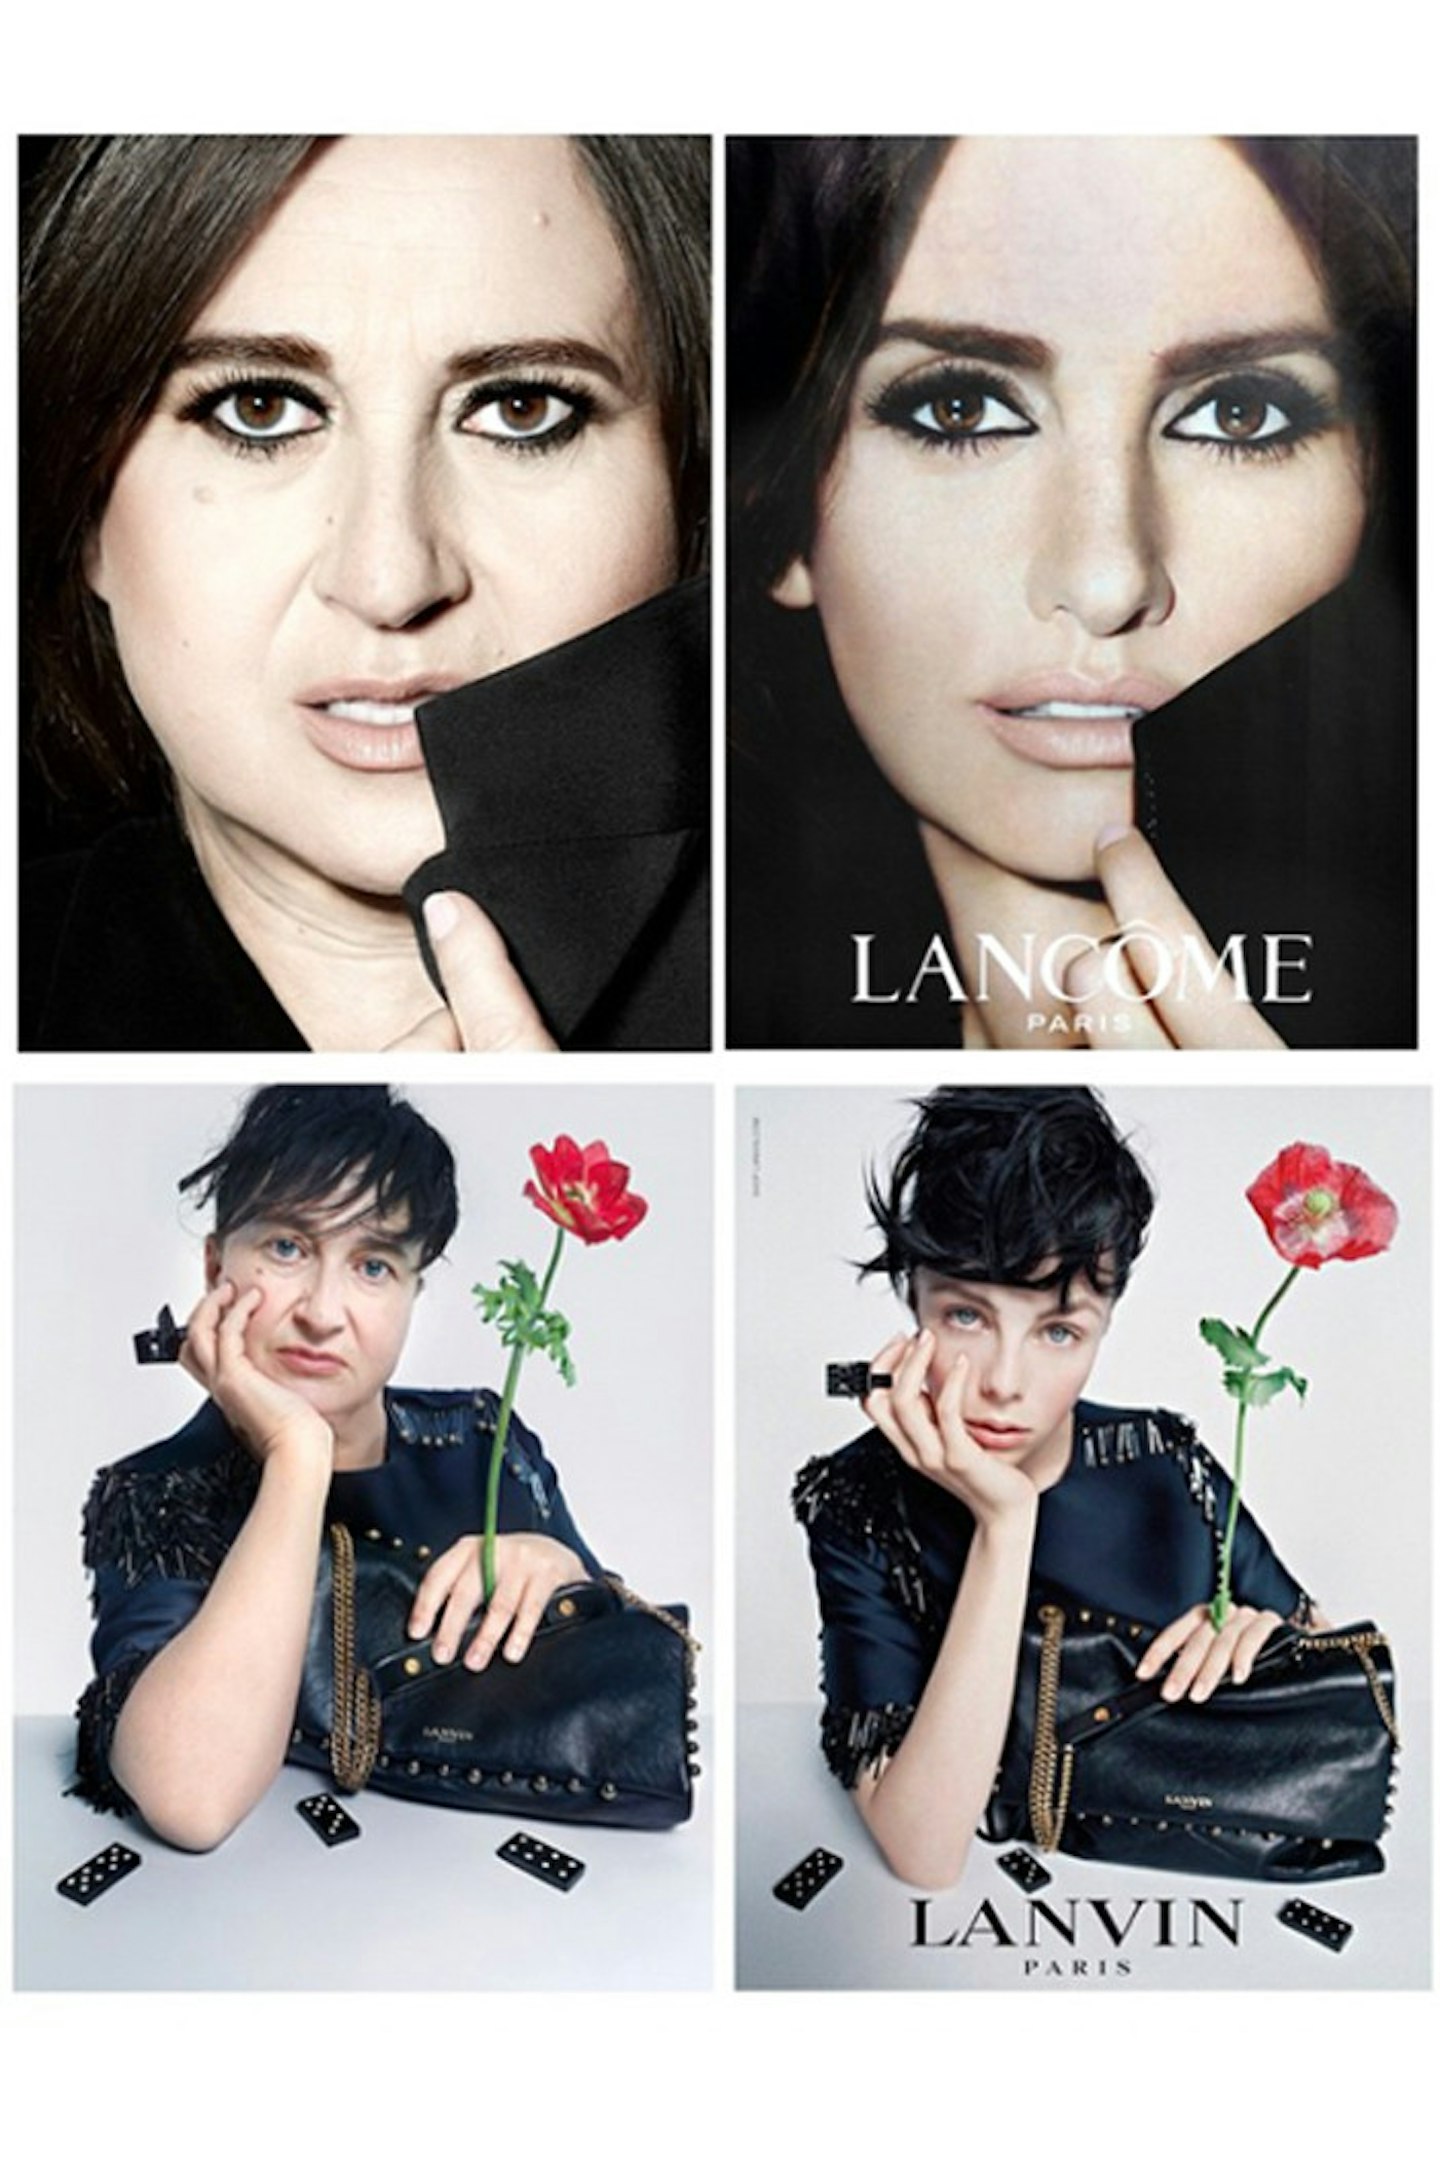 Nathalie Croquet as Penelope Cruz for Lancome and Edie Campbell for Lanvin